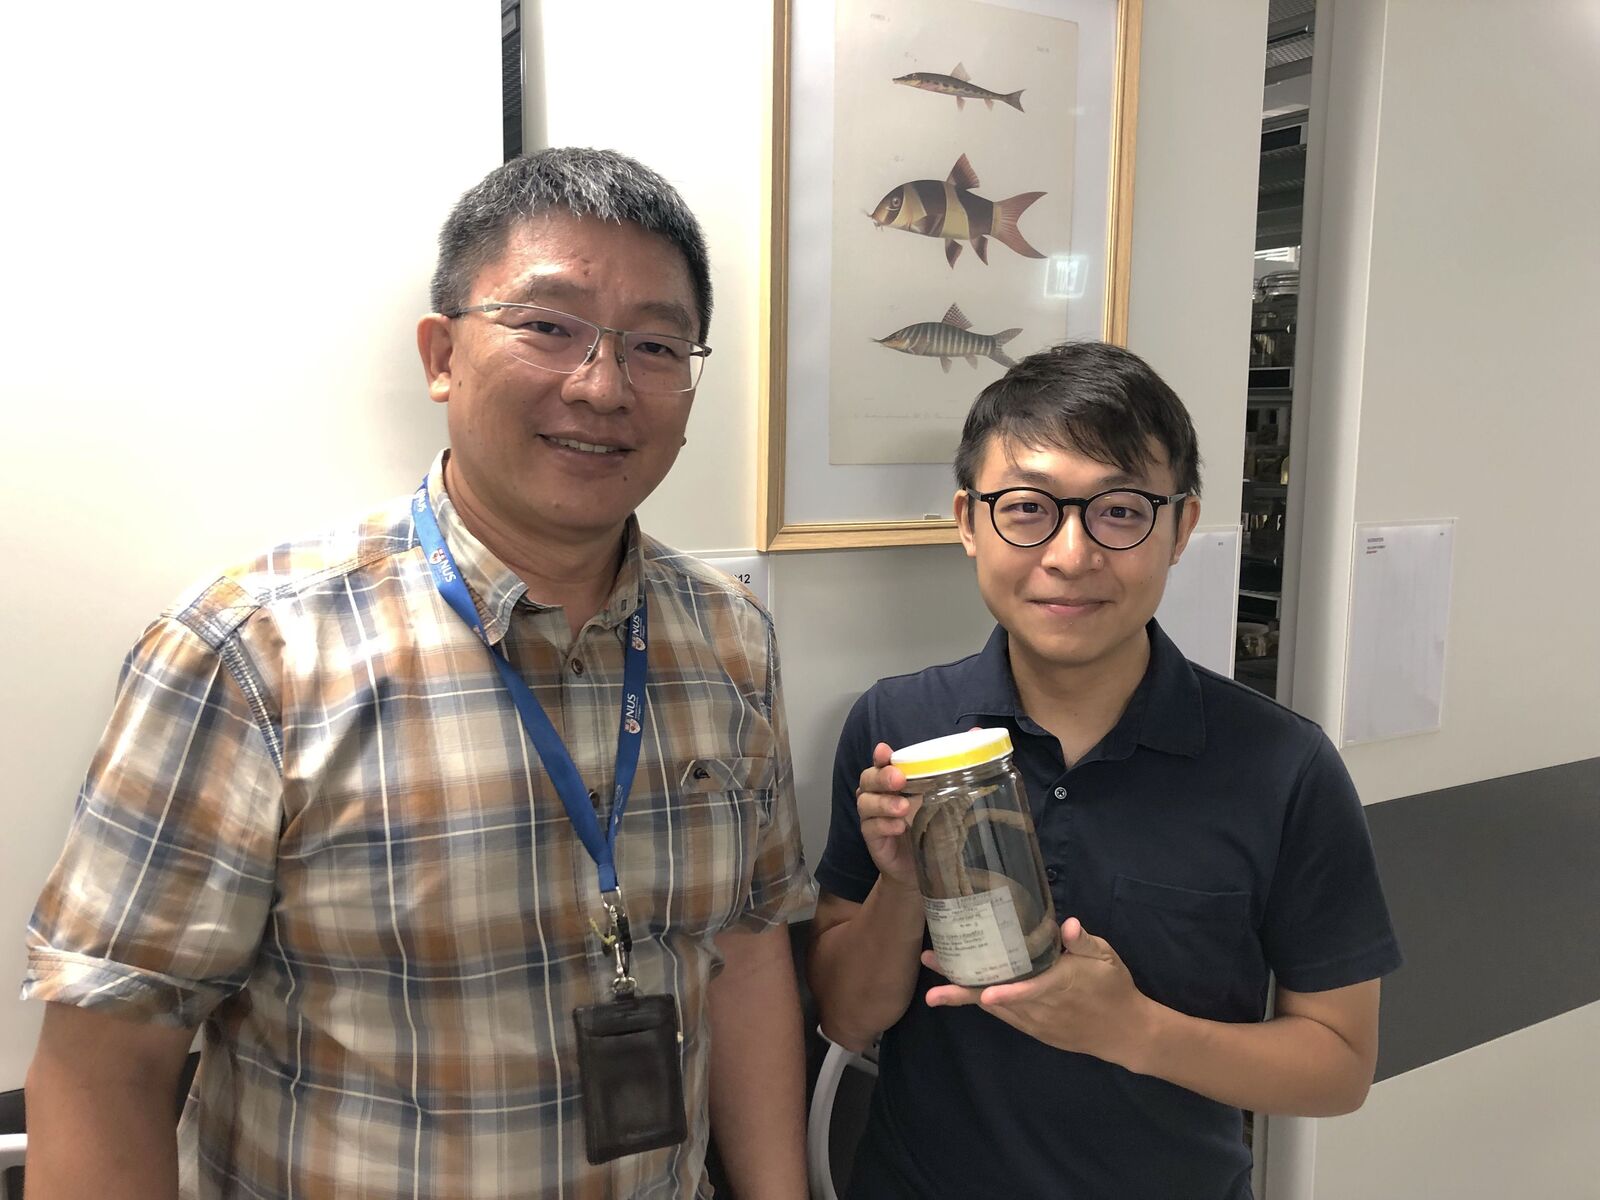 Members of the NSYSU cross-national research team include Heok Hui Tan, a researcher at the Lee Kong Chian Natural History Museum at the National University of Singapore (left), and Wen-Chien Huang, a doctoral student in the Doctoral Degree Program in Marine Biotechnology at NSYSU (right).